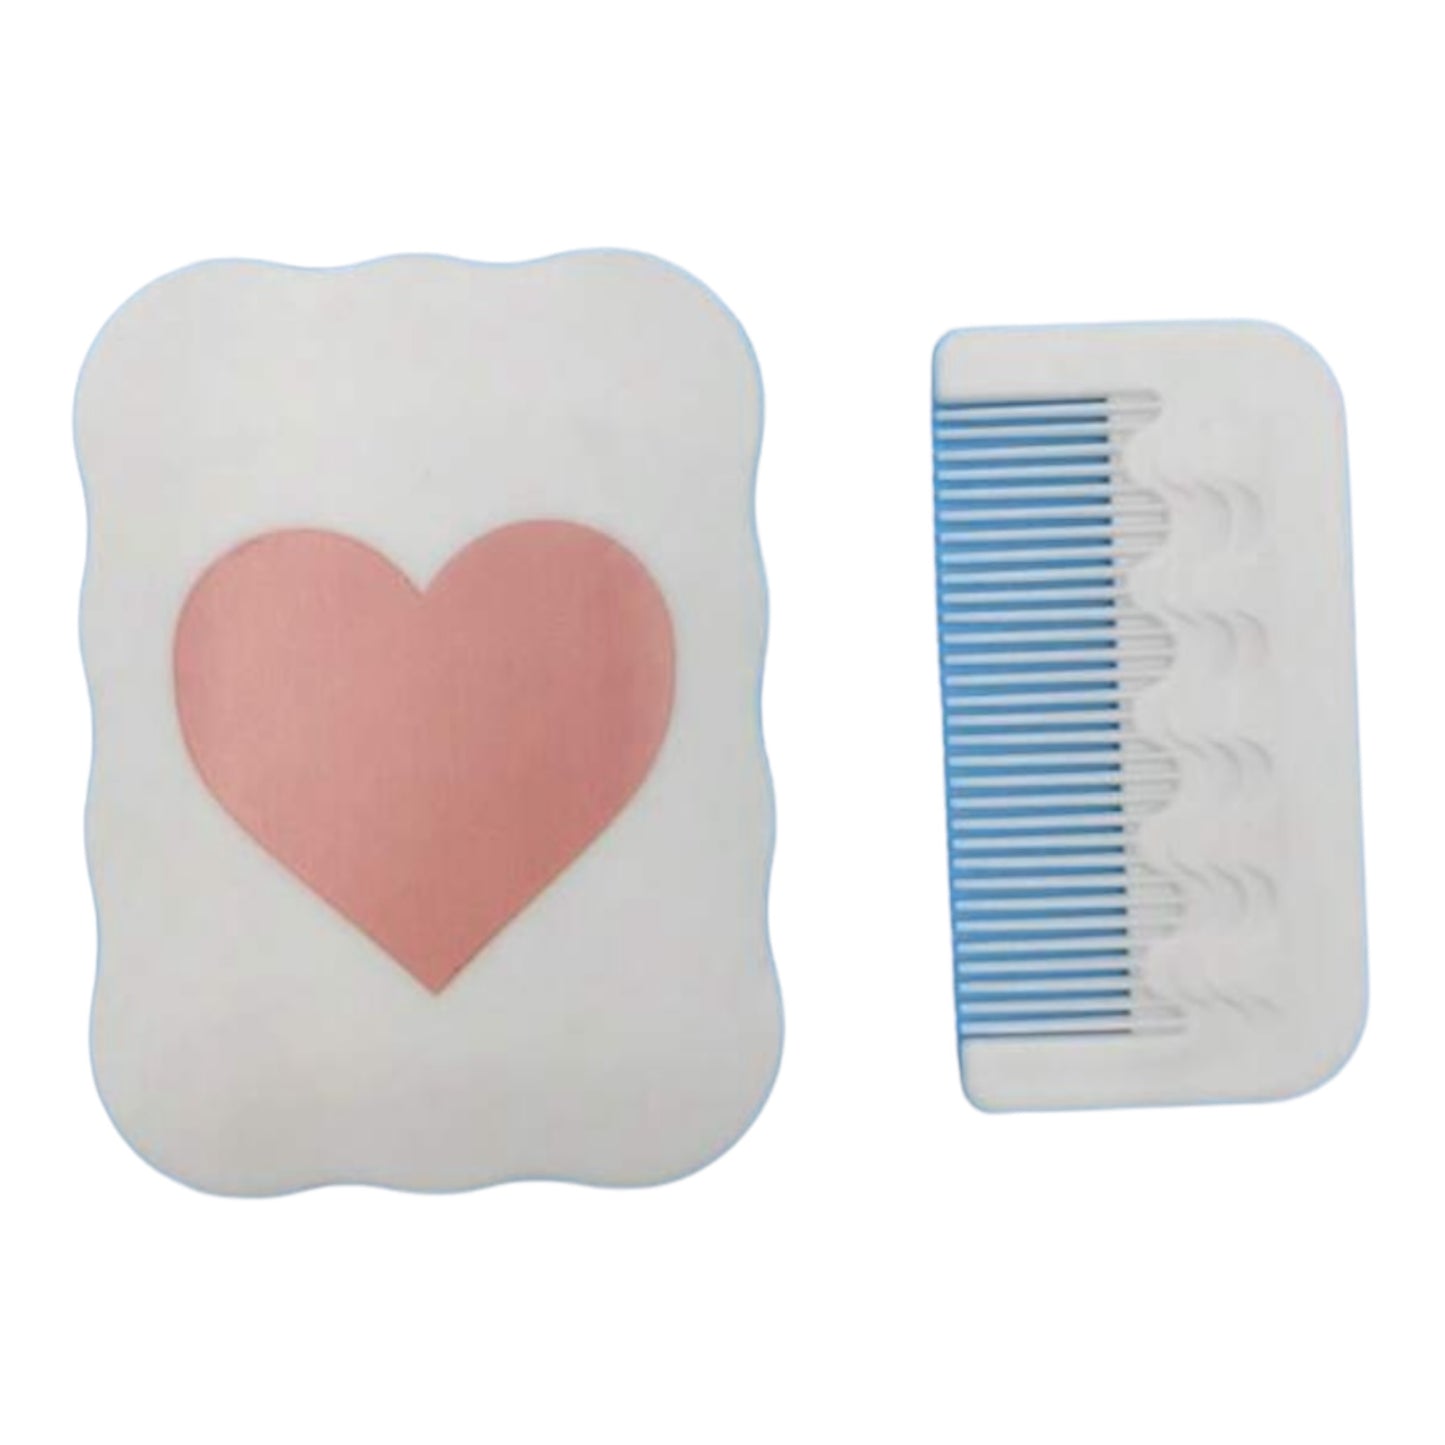 Mirror compact with comb